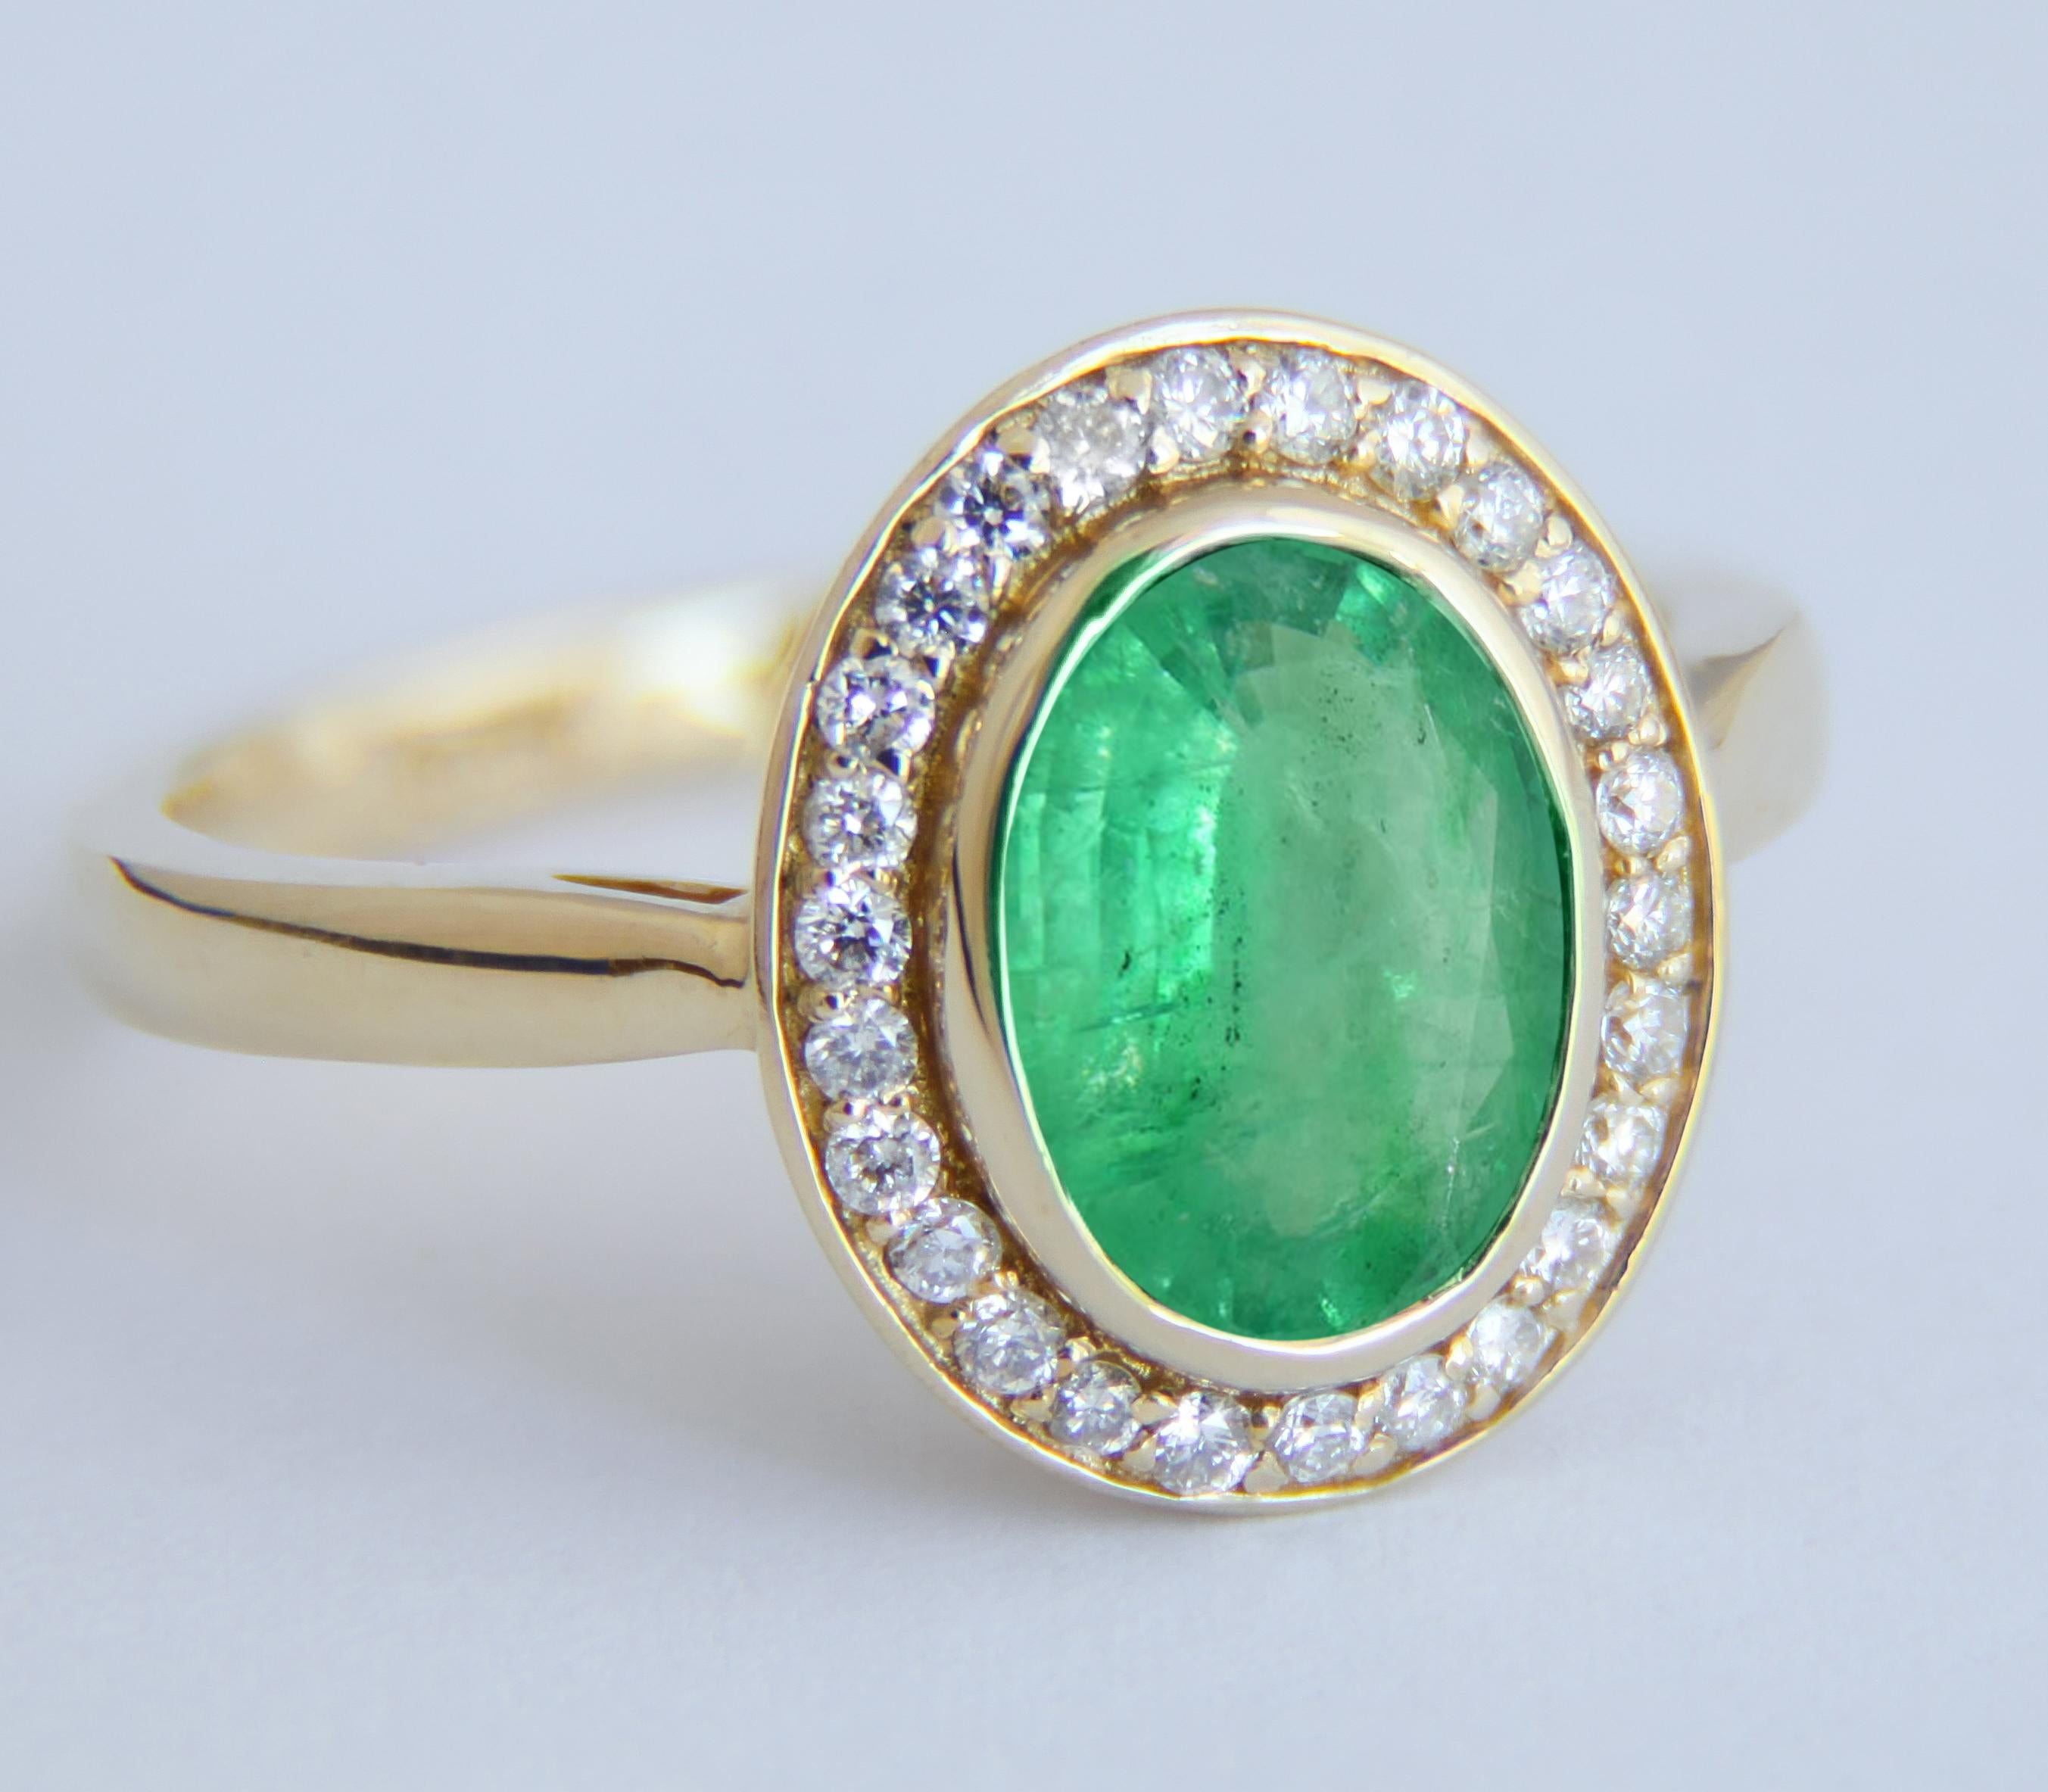 For Sale:  Emerald and diamonds 14k gold ring. 6